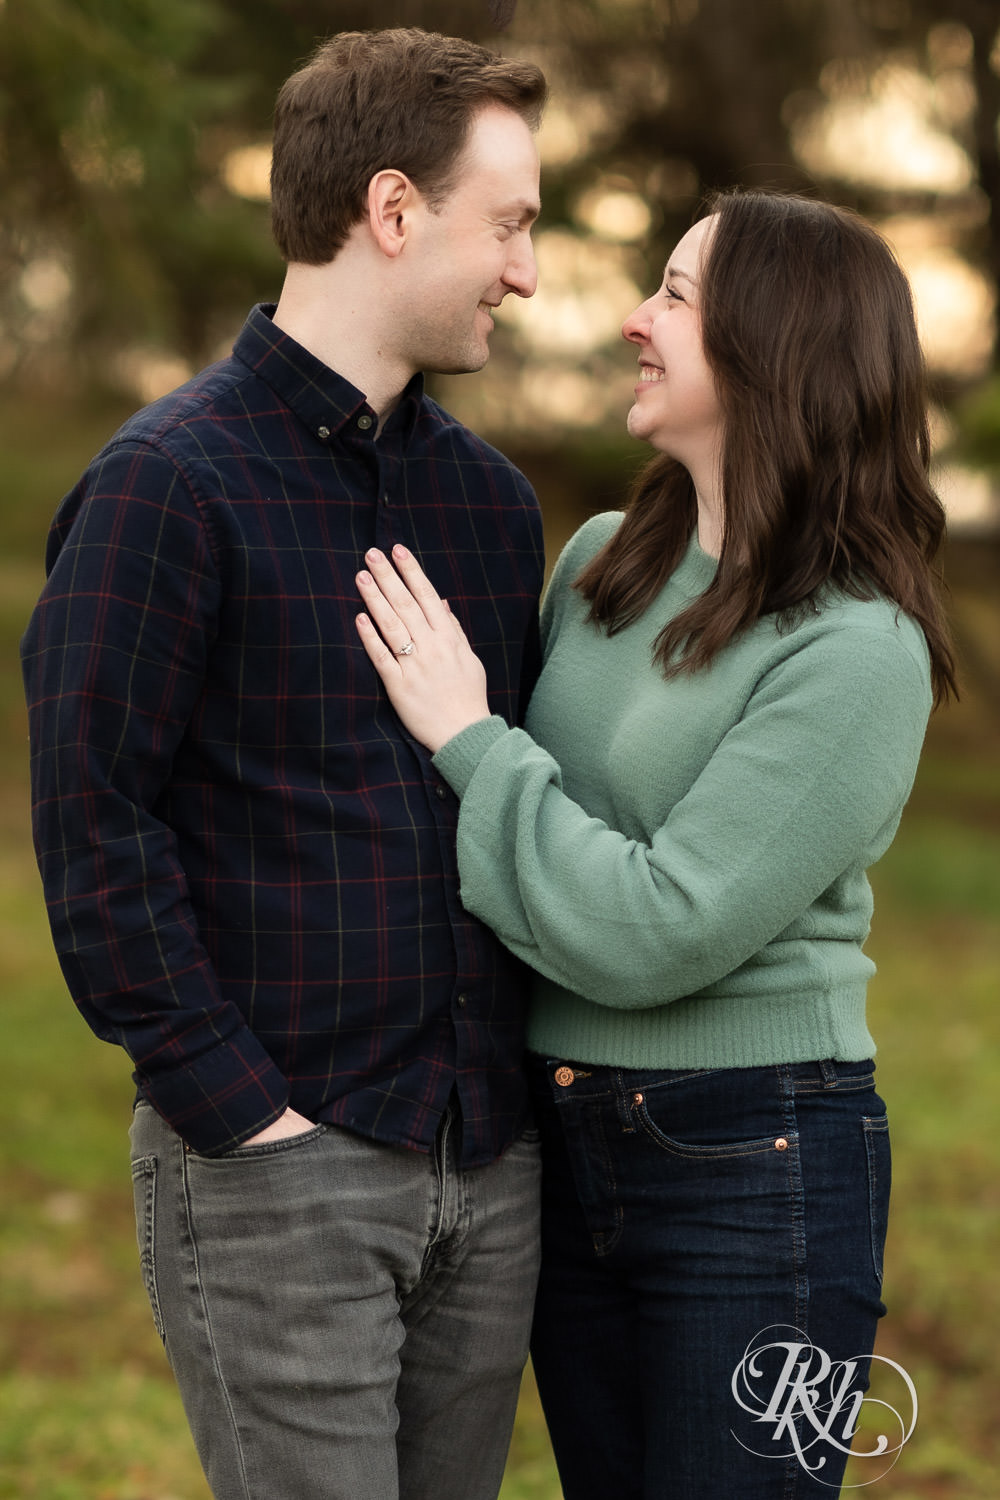 Man and woman smile during winter engagement photography at Minnesota Landscape Arboretum in Chaska, Minnesota.